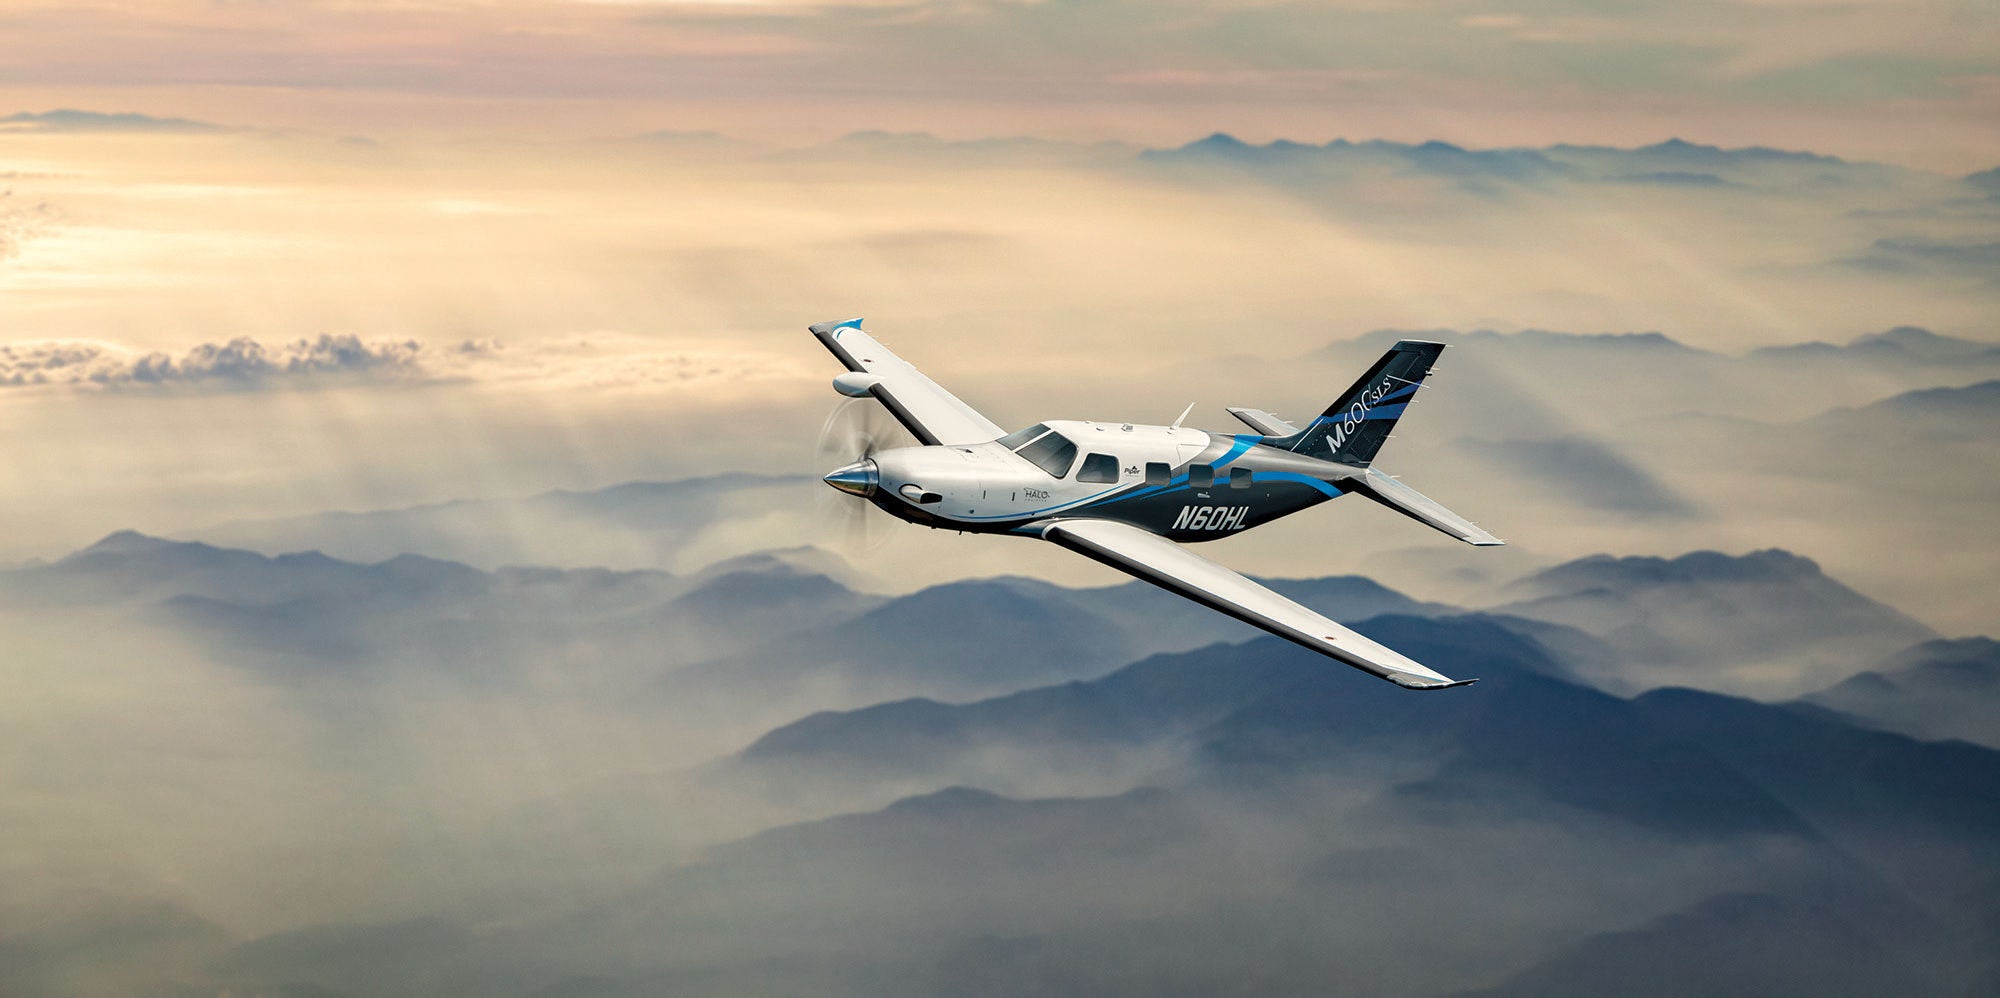 FAA Clears Piper M600/SLS for Unpaved Field Operations